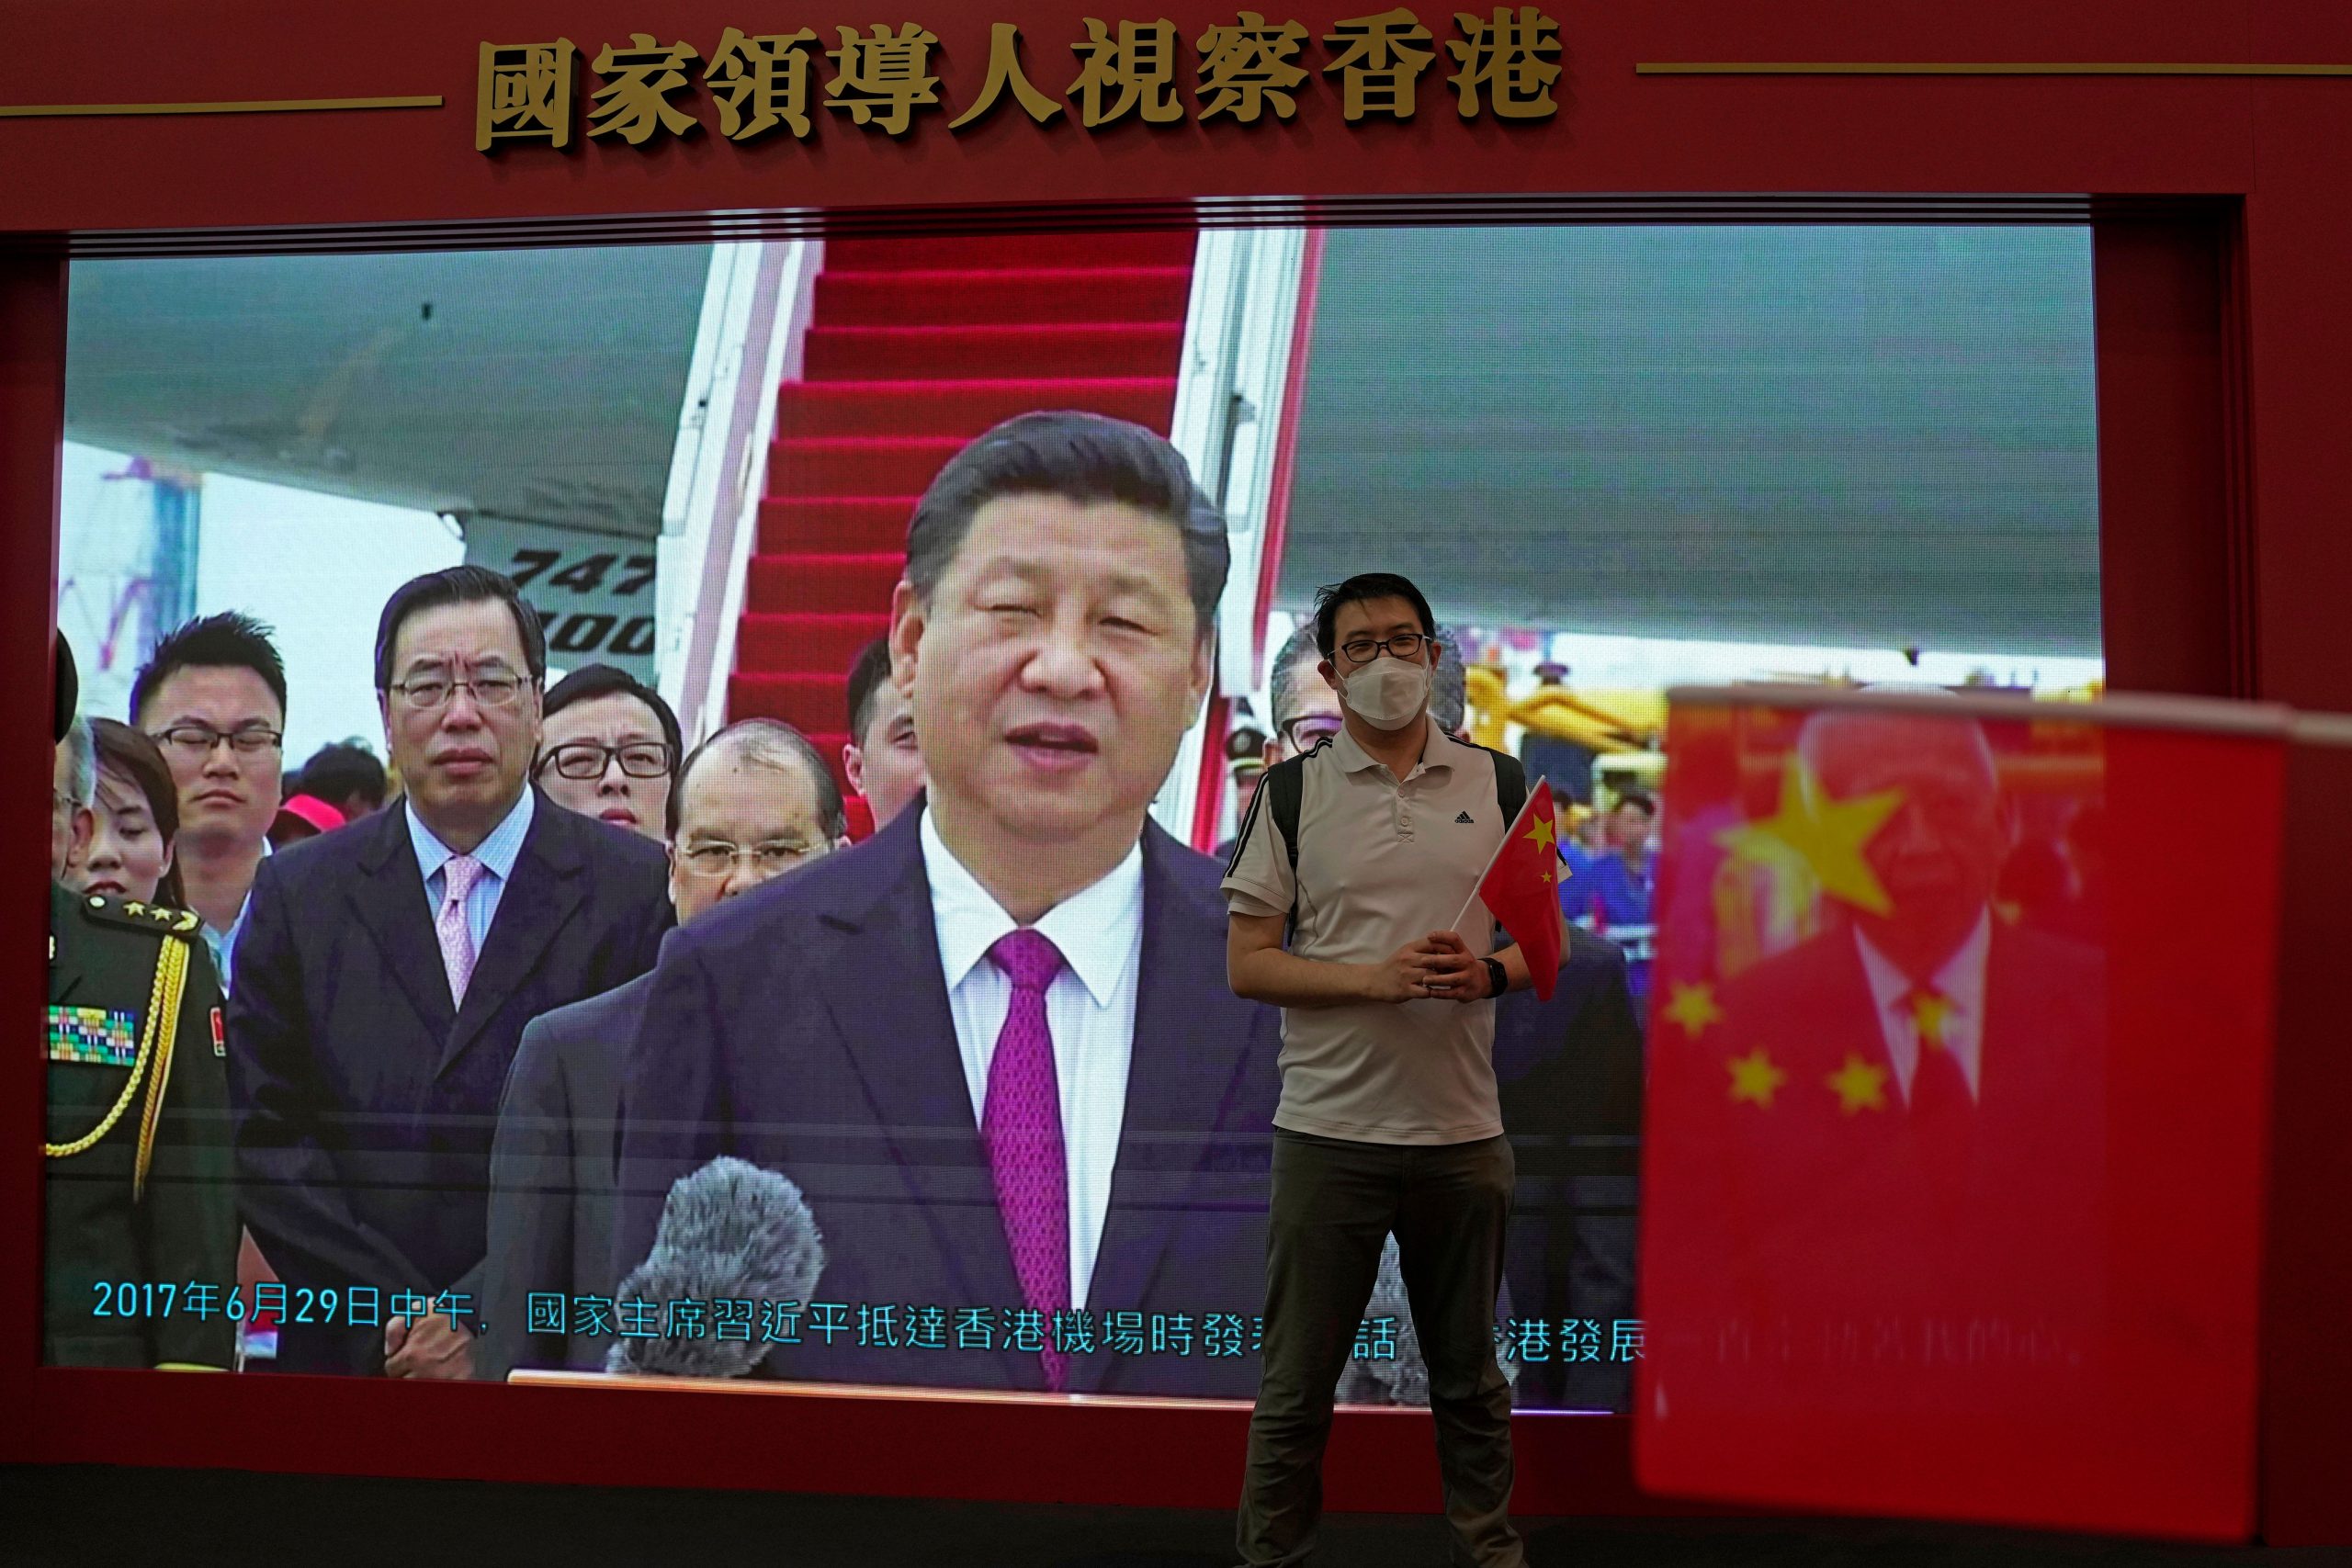 China’s President Xi Jinping arrives in Hong Kong for 25th anniversary of handover